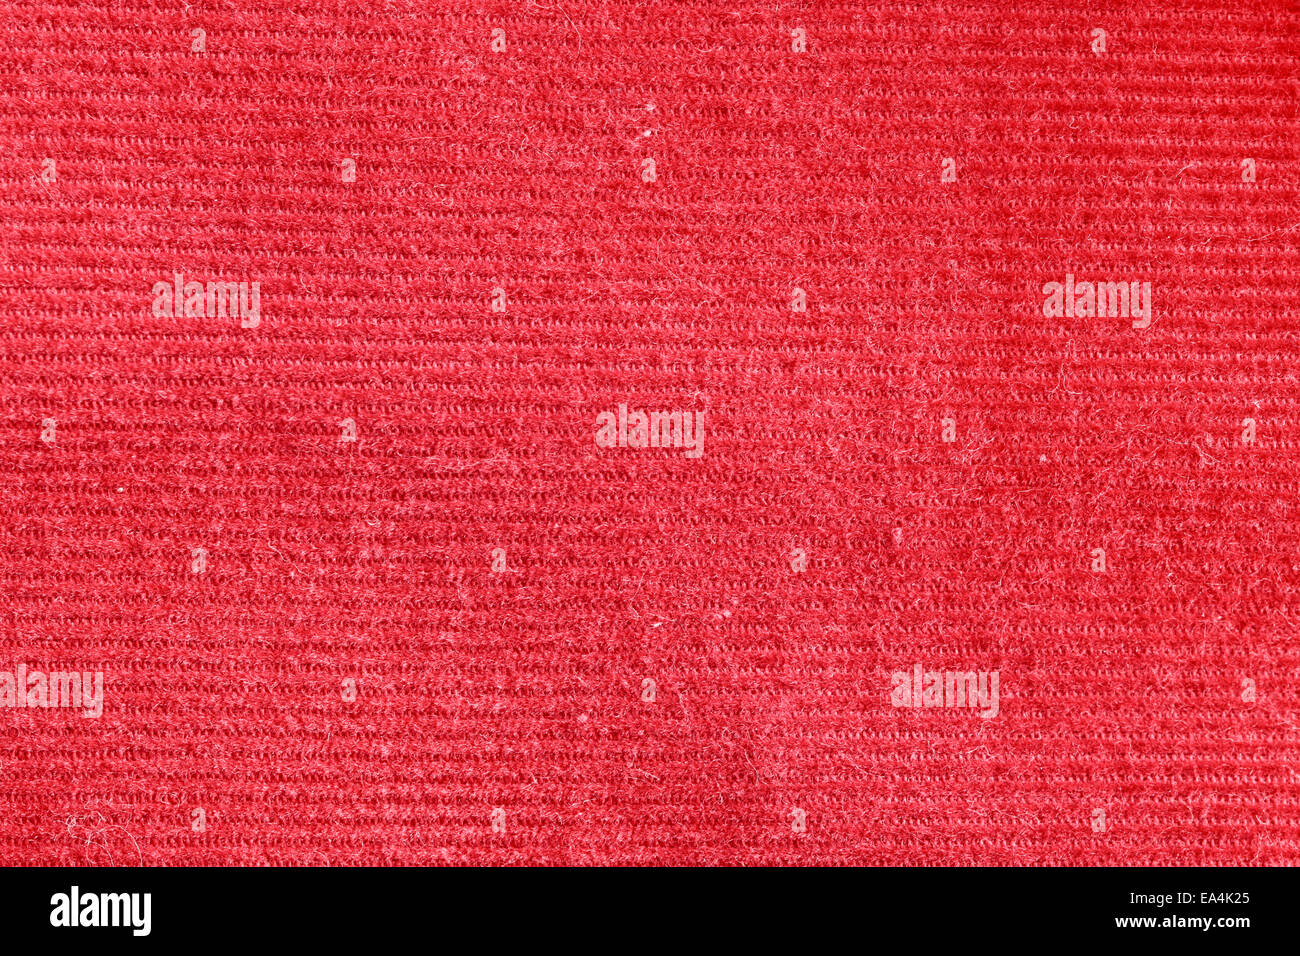 Red corduroy fabric as a background image Stock Photo